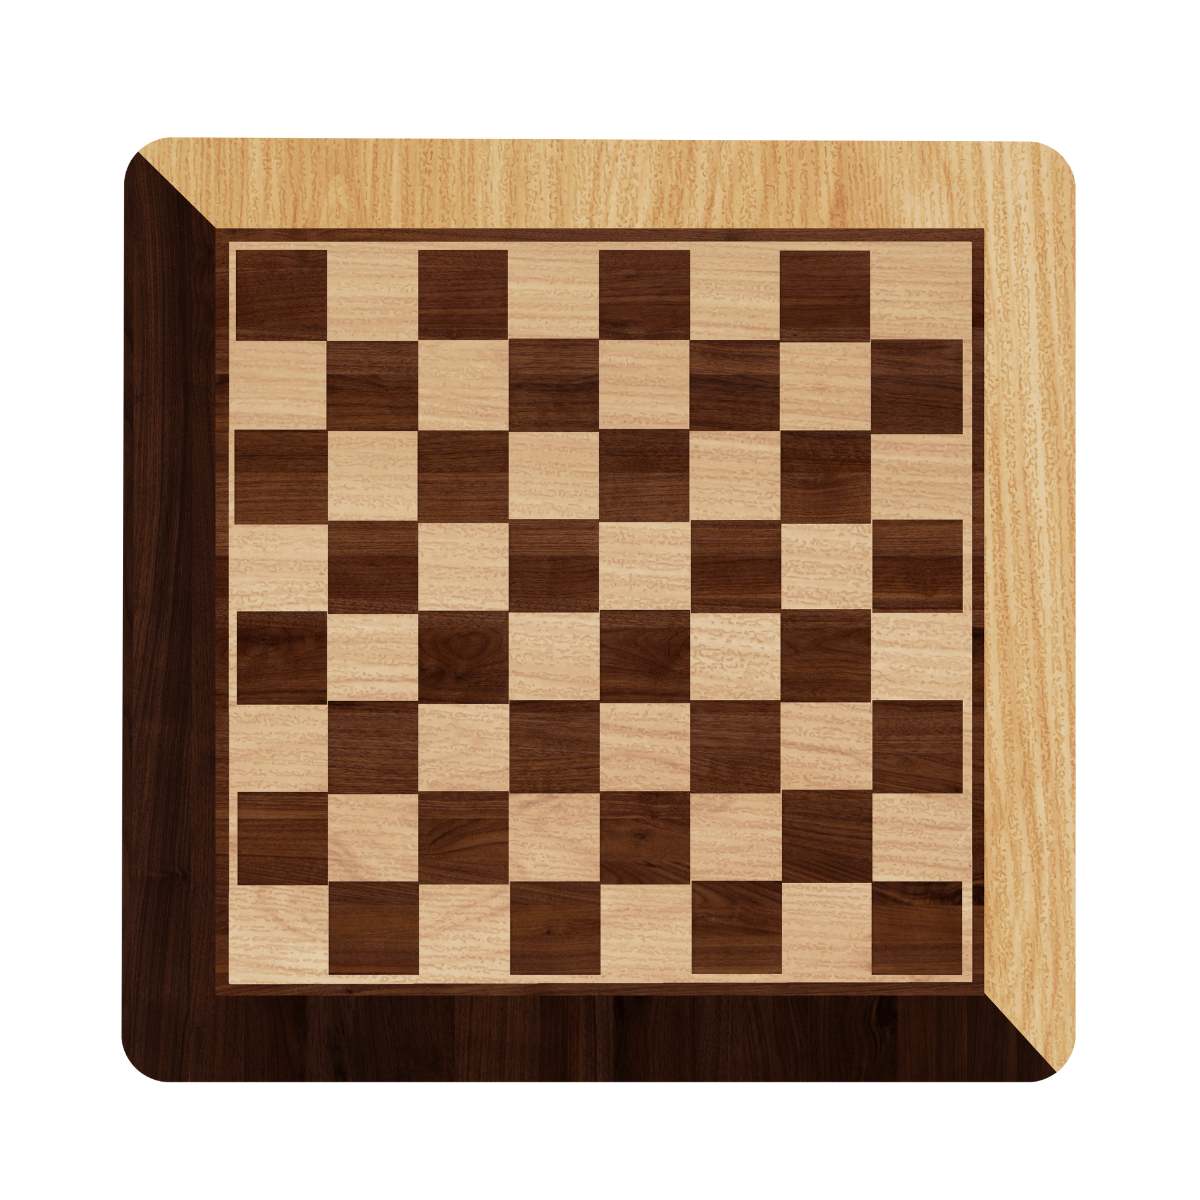 Animal Jigsaw Puzzle > Wooden Jigsaw Puzzle > Jigsaw Puzzle A3 Chess - Jigsaw Puzzle